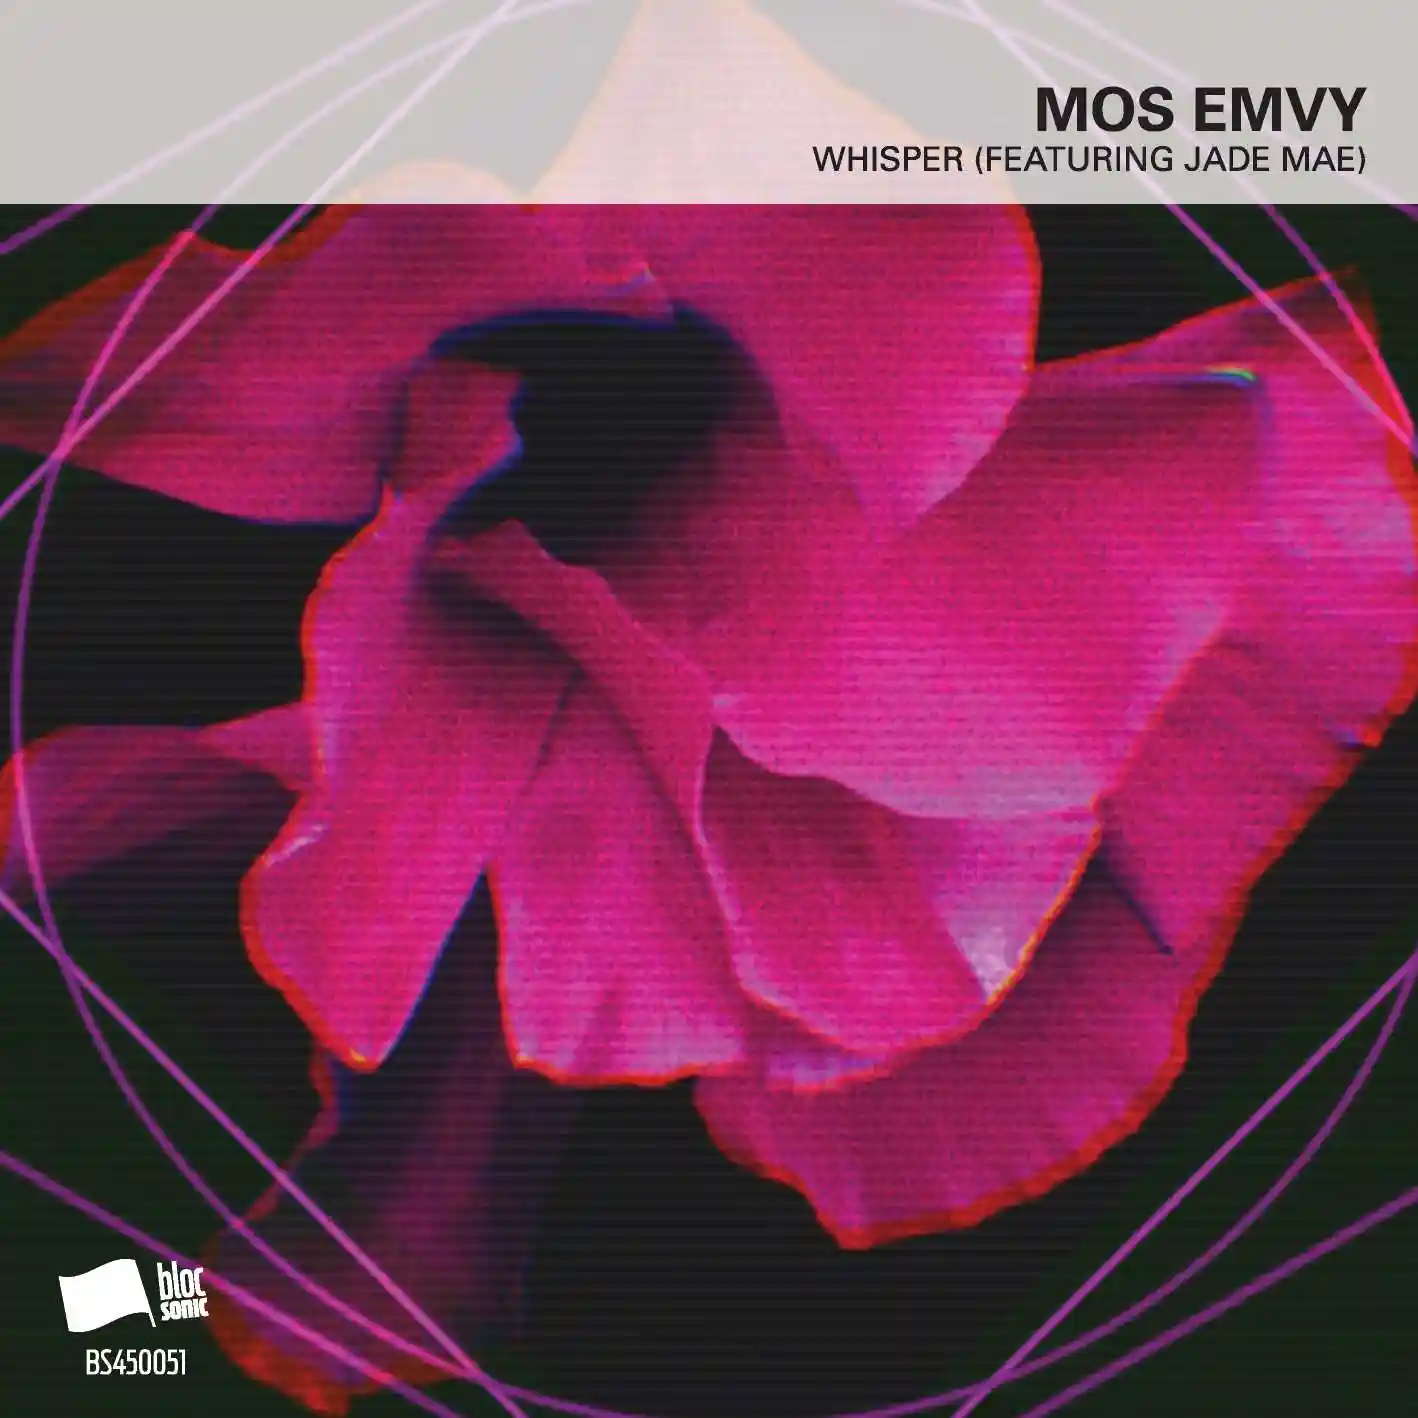 Album cover for “Whisper (Featuring Jade Mae)” by Mos Emvy